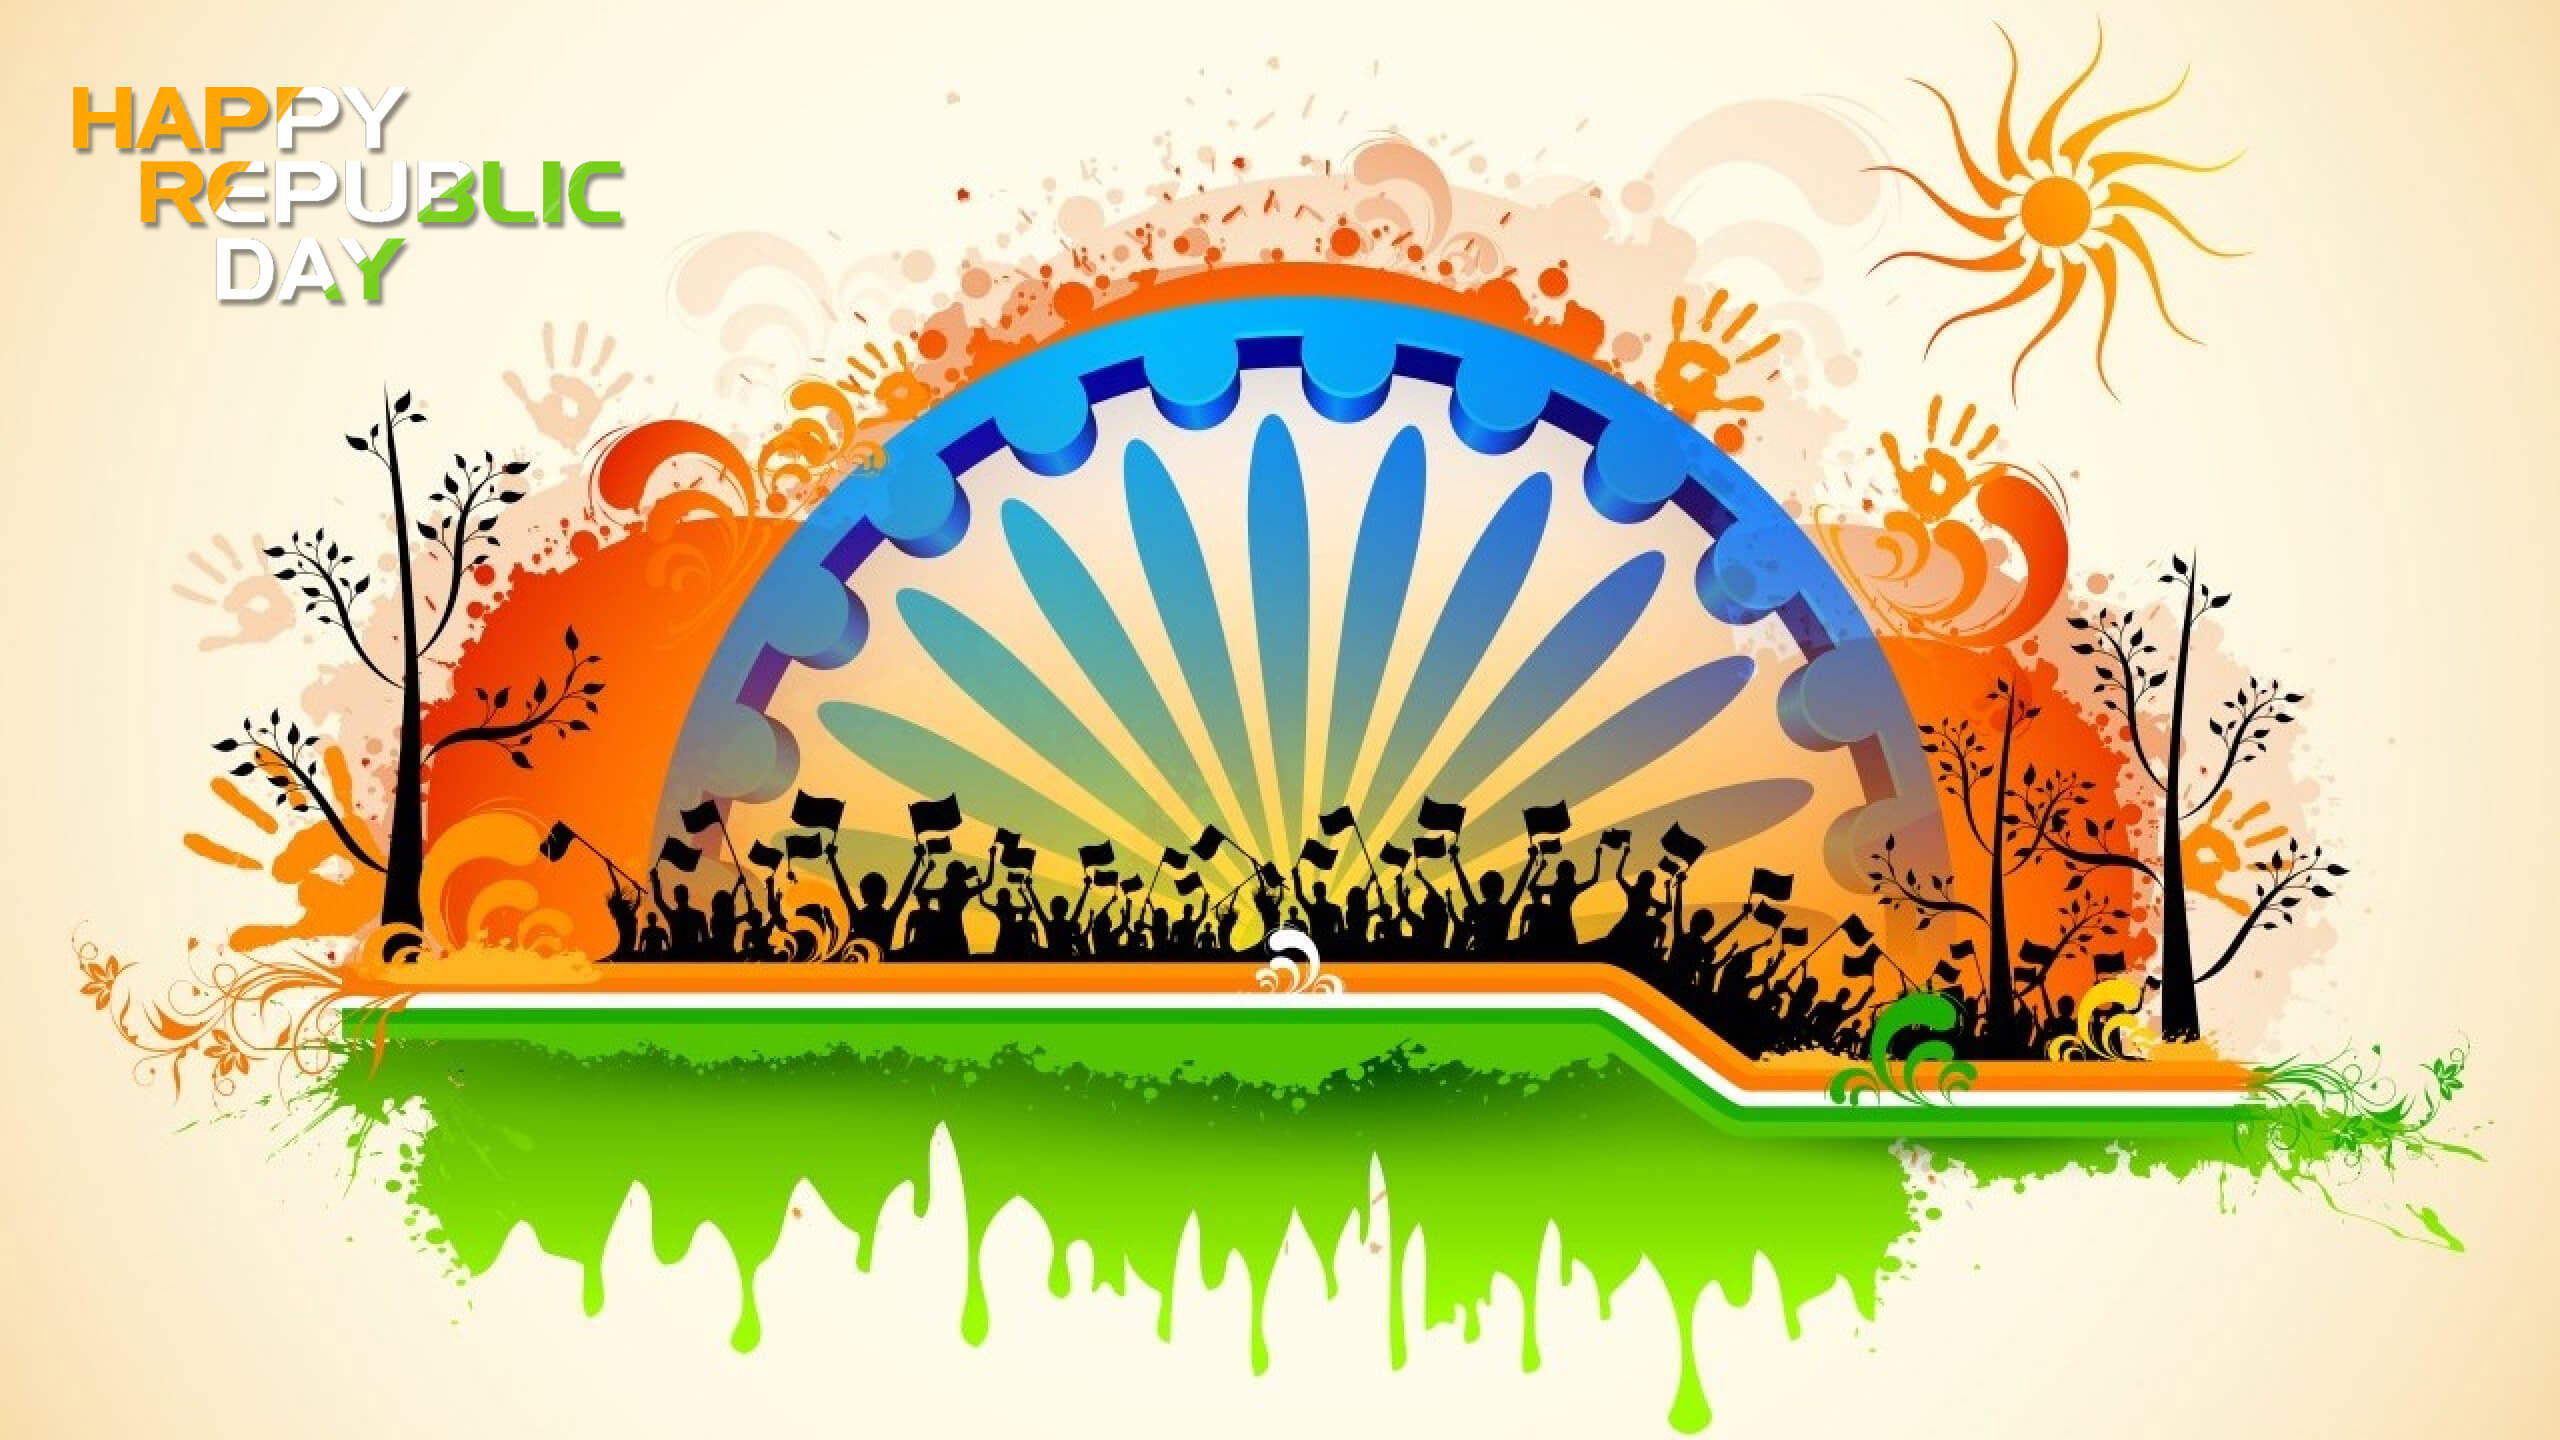 Top 5 Patriotic Gifting Ideas for Republic Day | Republic Day Gift Ideas